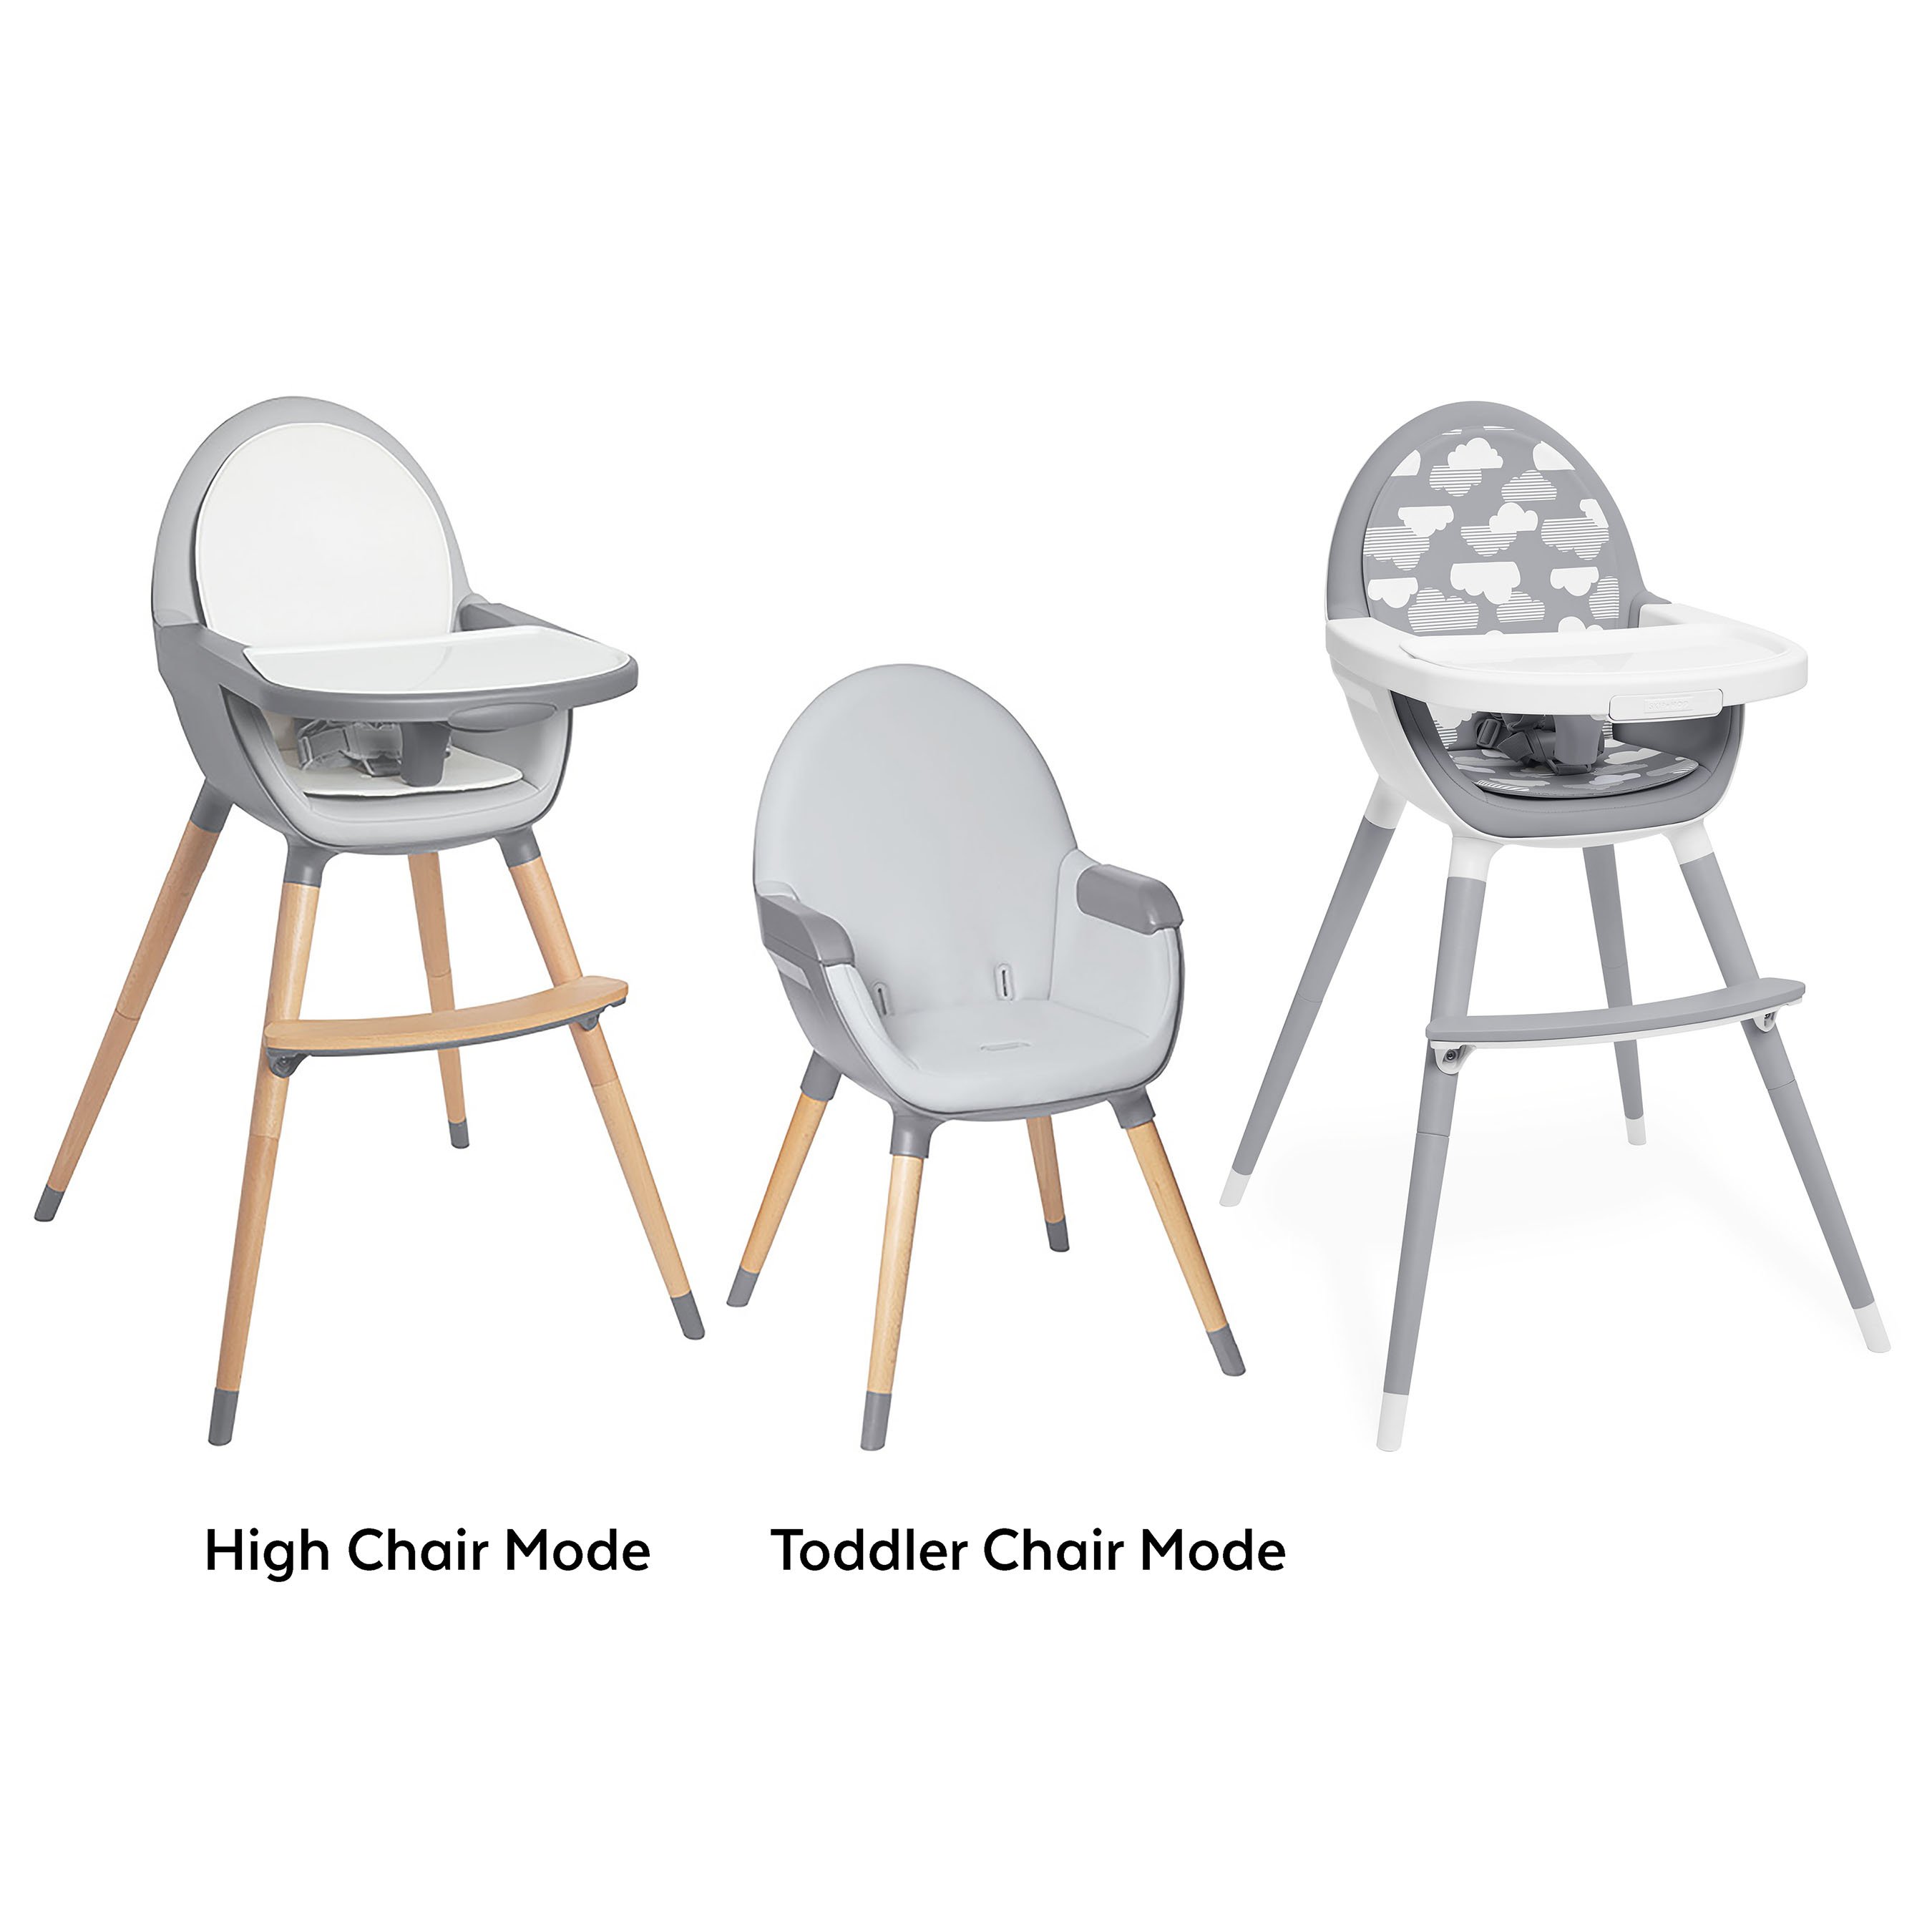 Skip Hop On Twitter Skip Hop Is Expanding Its Previously Issued Voluntary Recall Of The Tuo Convertible High Chair Due To A Fall Hazard Click Here For More Information Https Tco Gwh80hslv9 Https Tco Nyzftwum9h